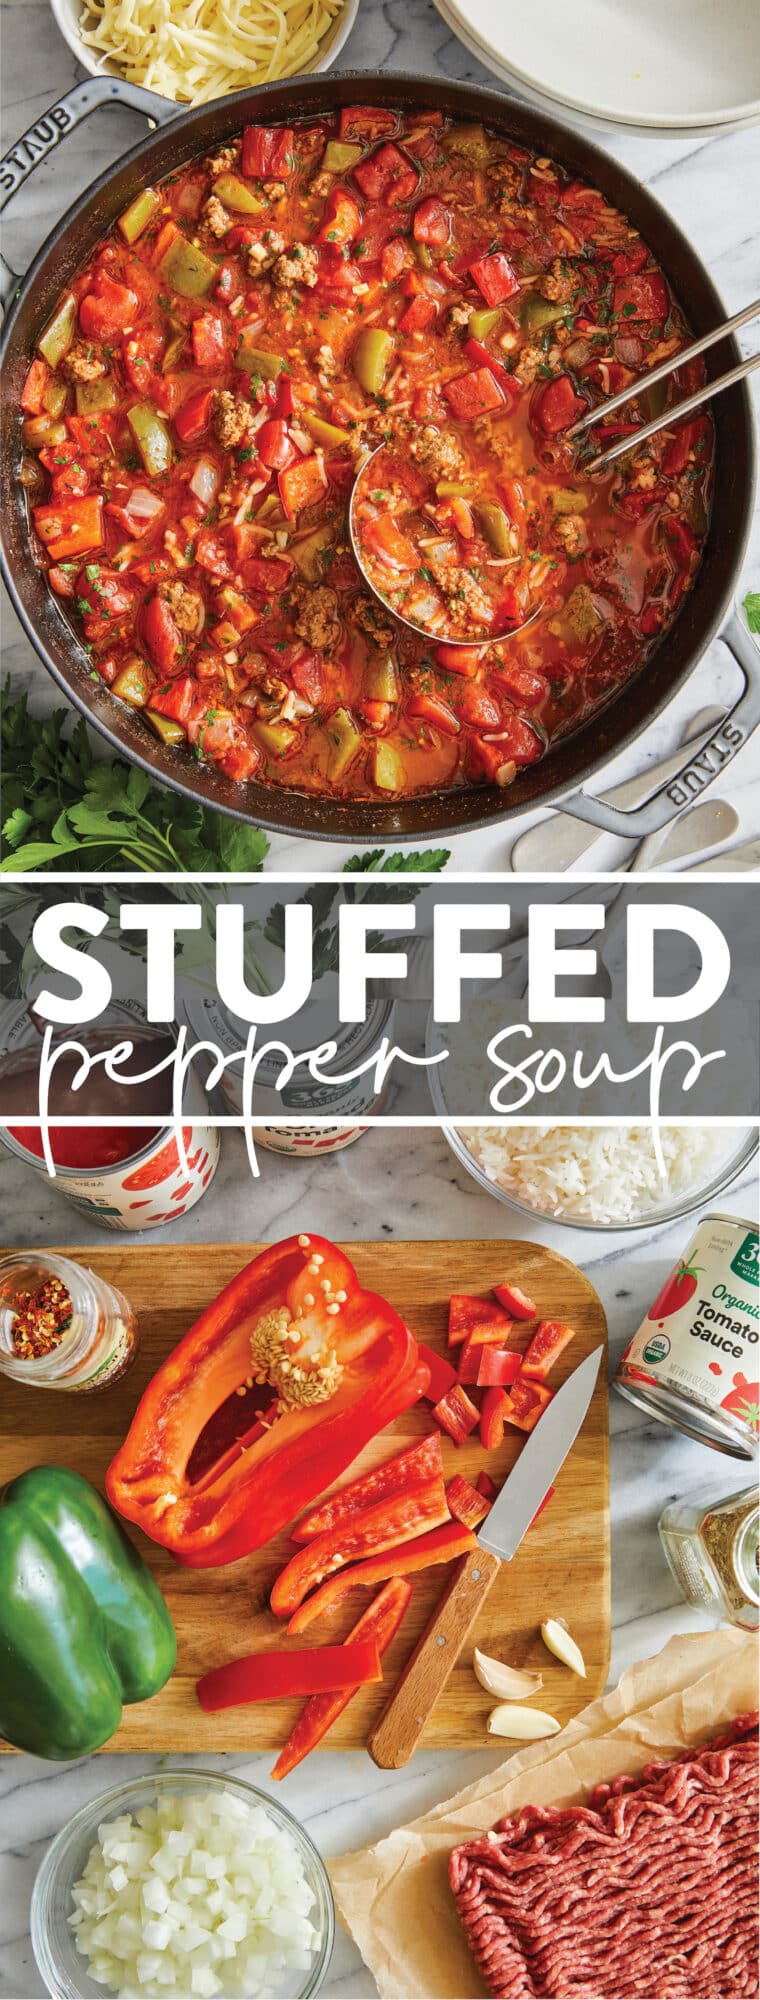 Stuffed Pepper Soup - A super easy, fast, budget-friendly one pot dinner! So hearty and so so cozy with ground beef, rice and bell peppers.